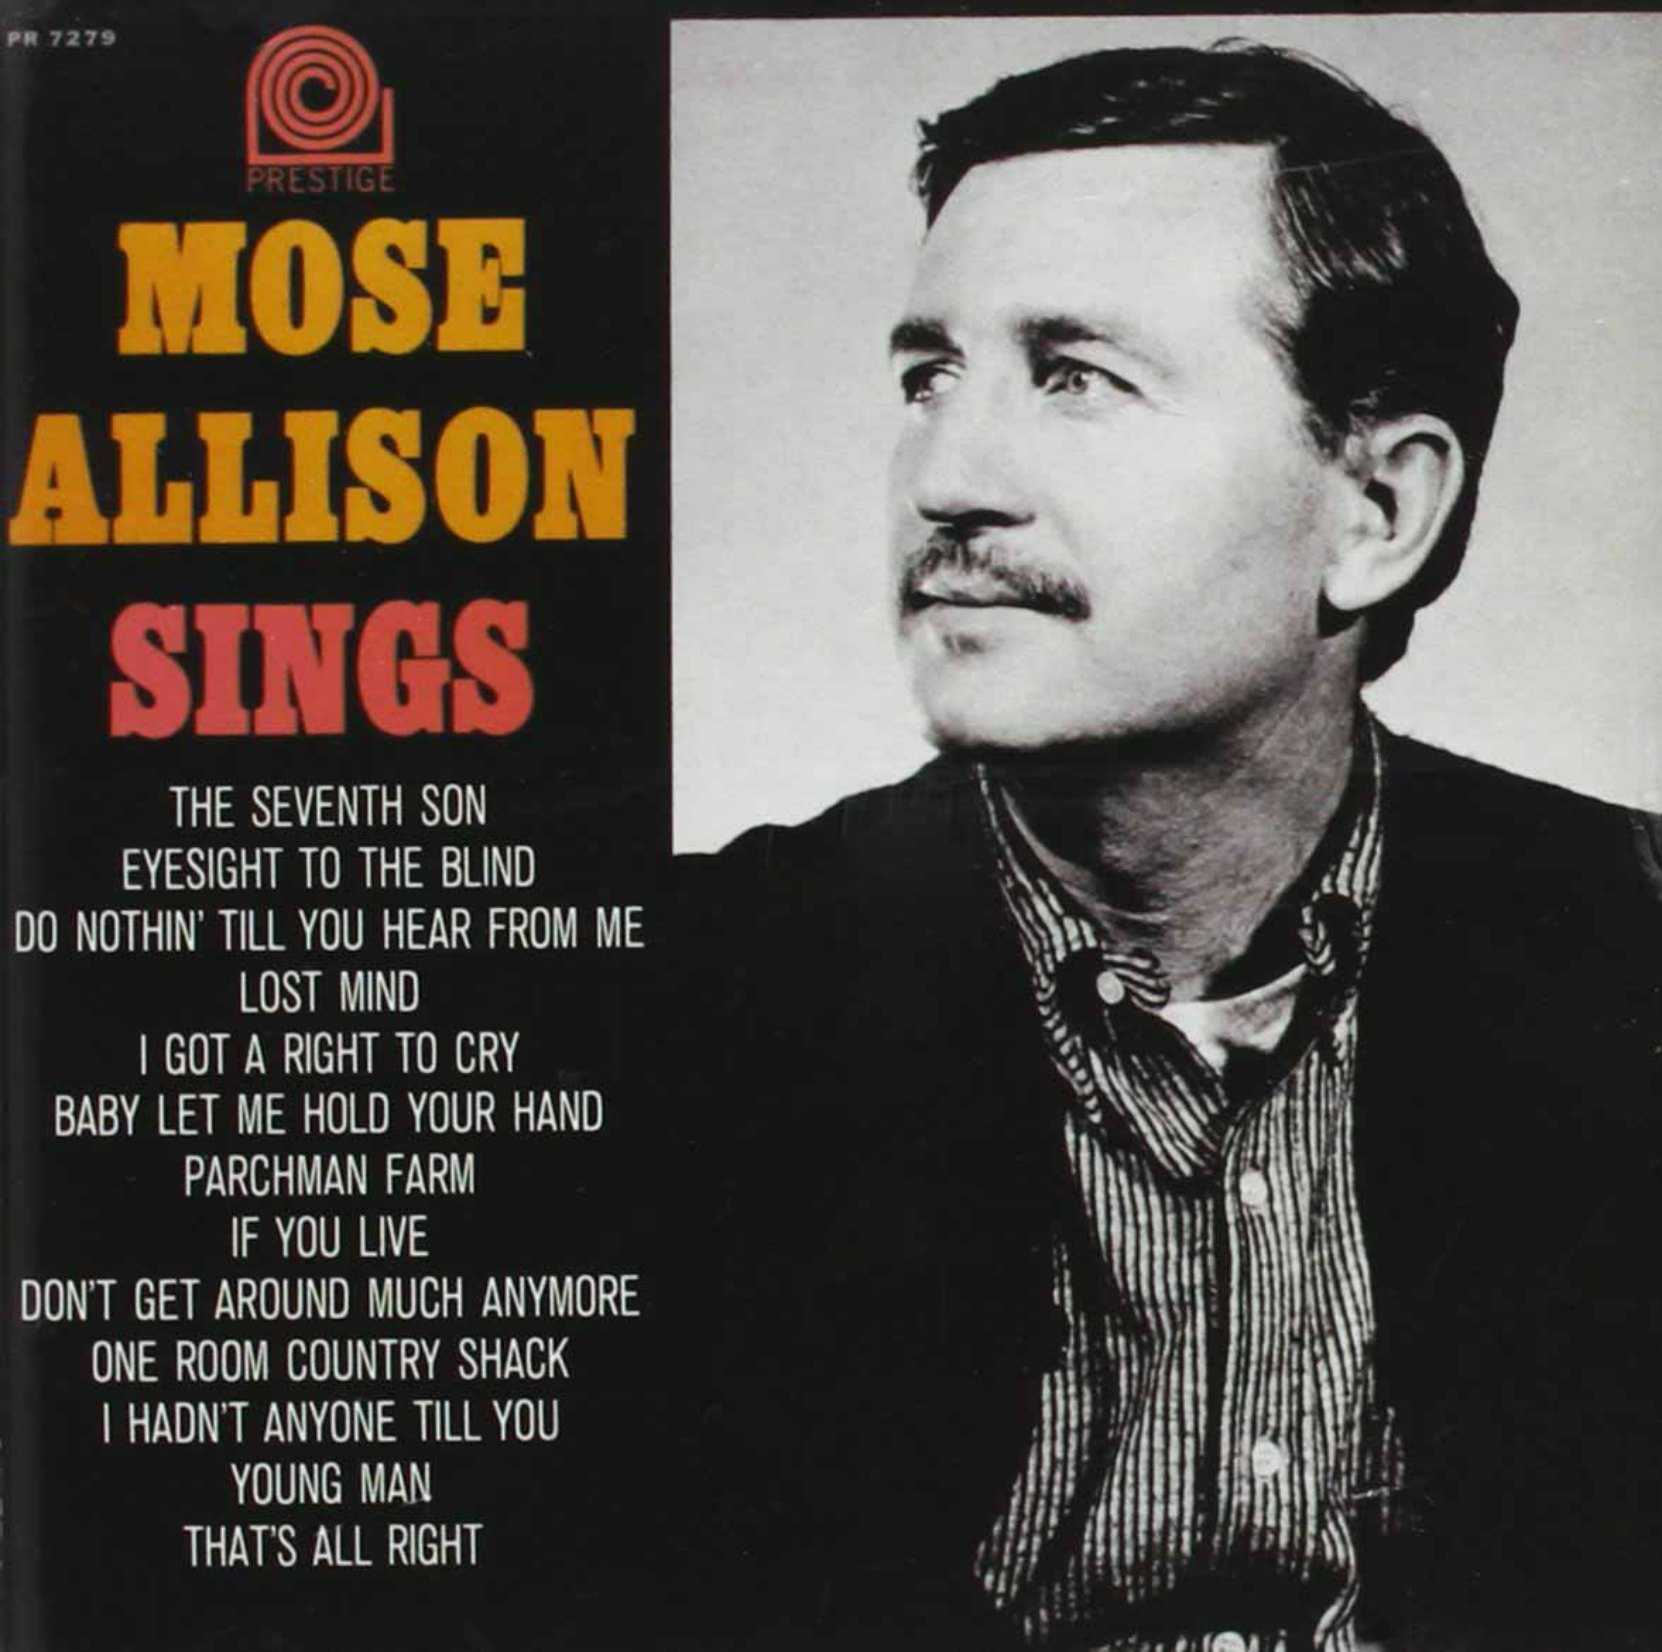 CD cover, Moses Allison Sings by Moses Allison, on Prestige Records